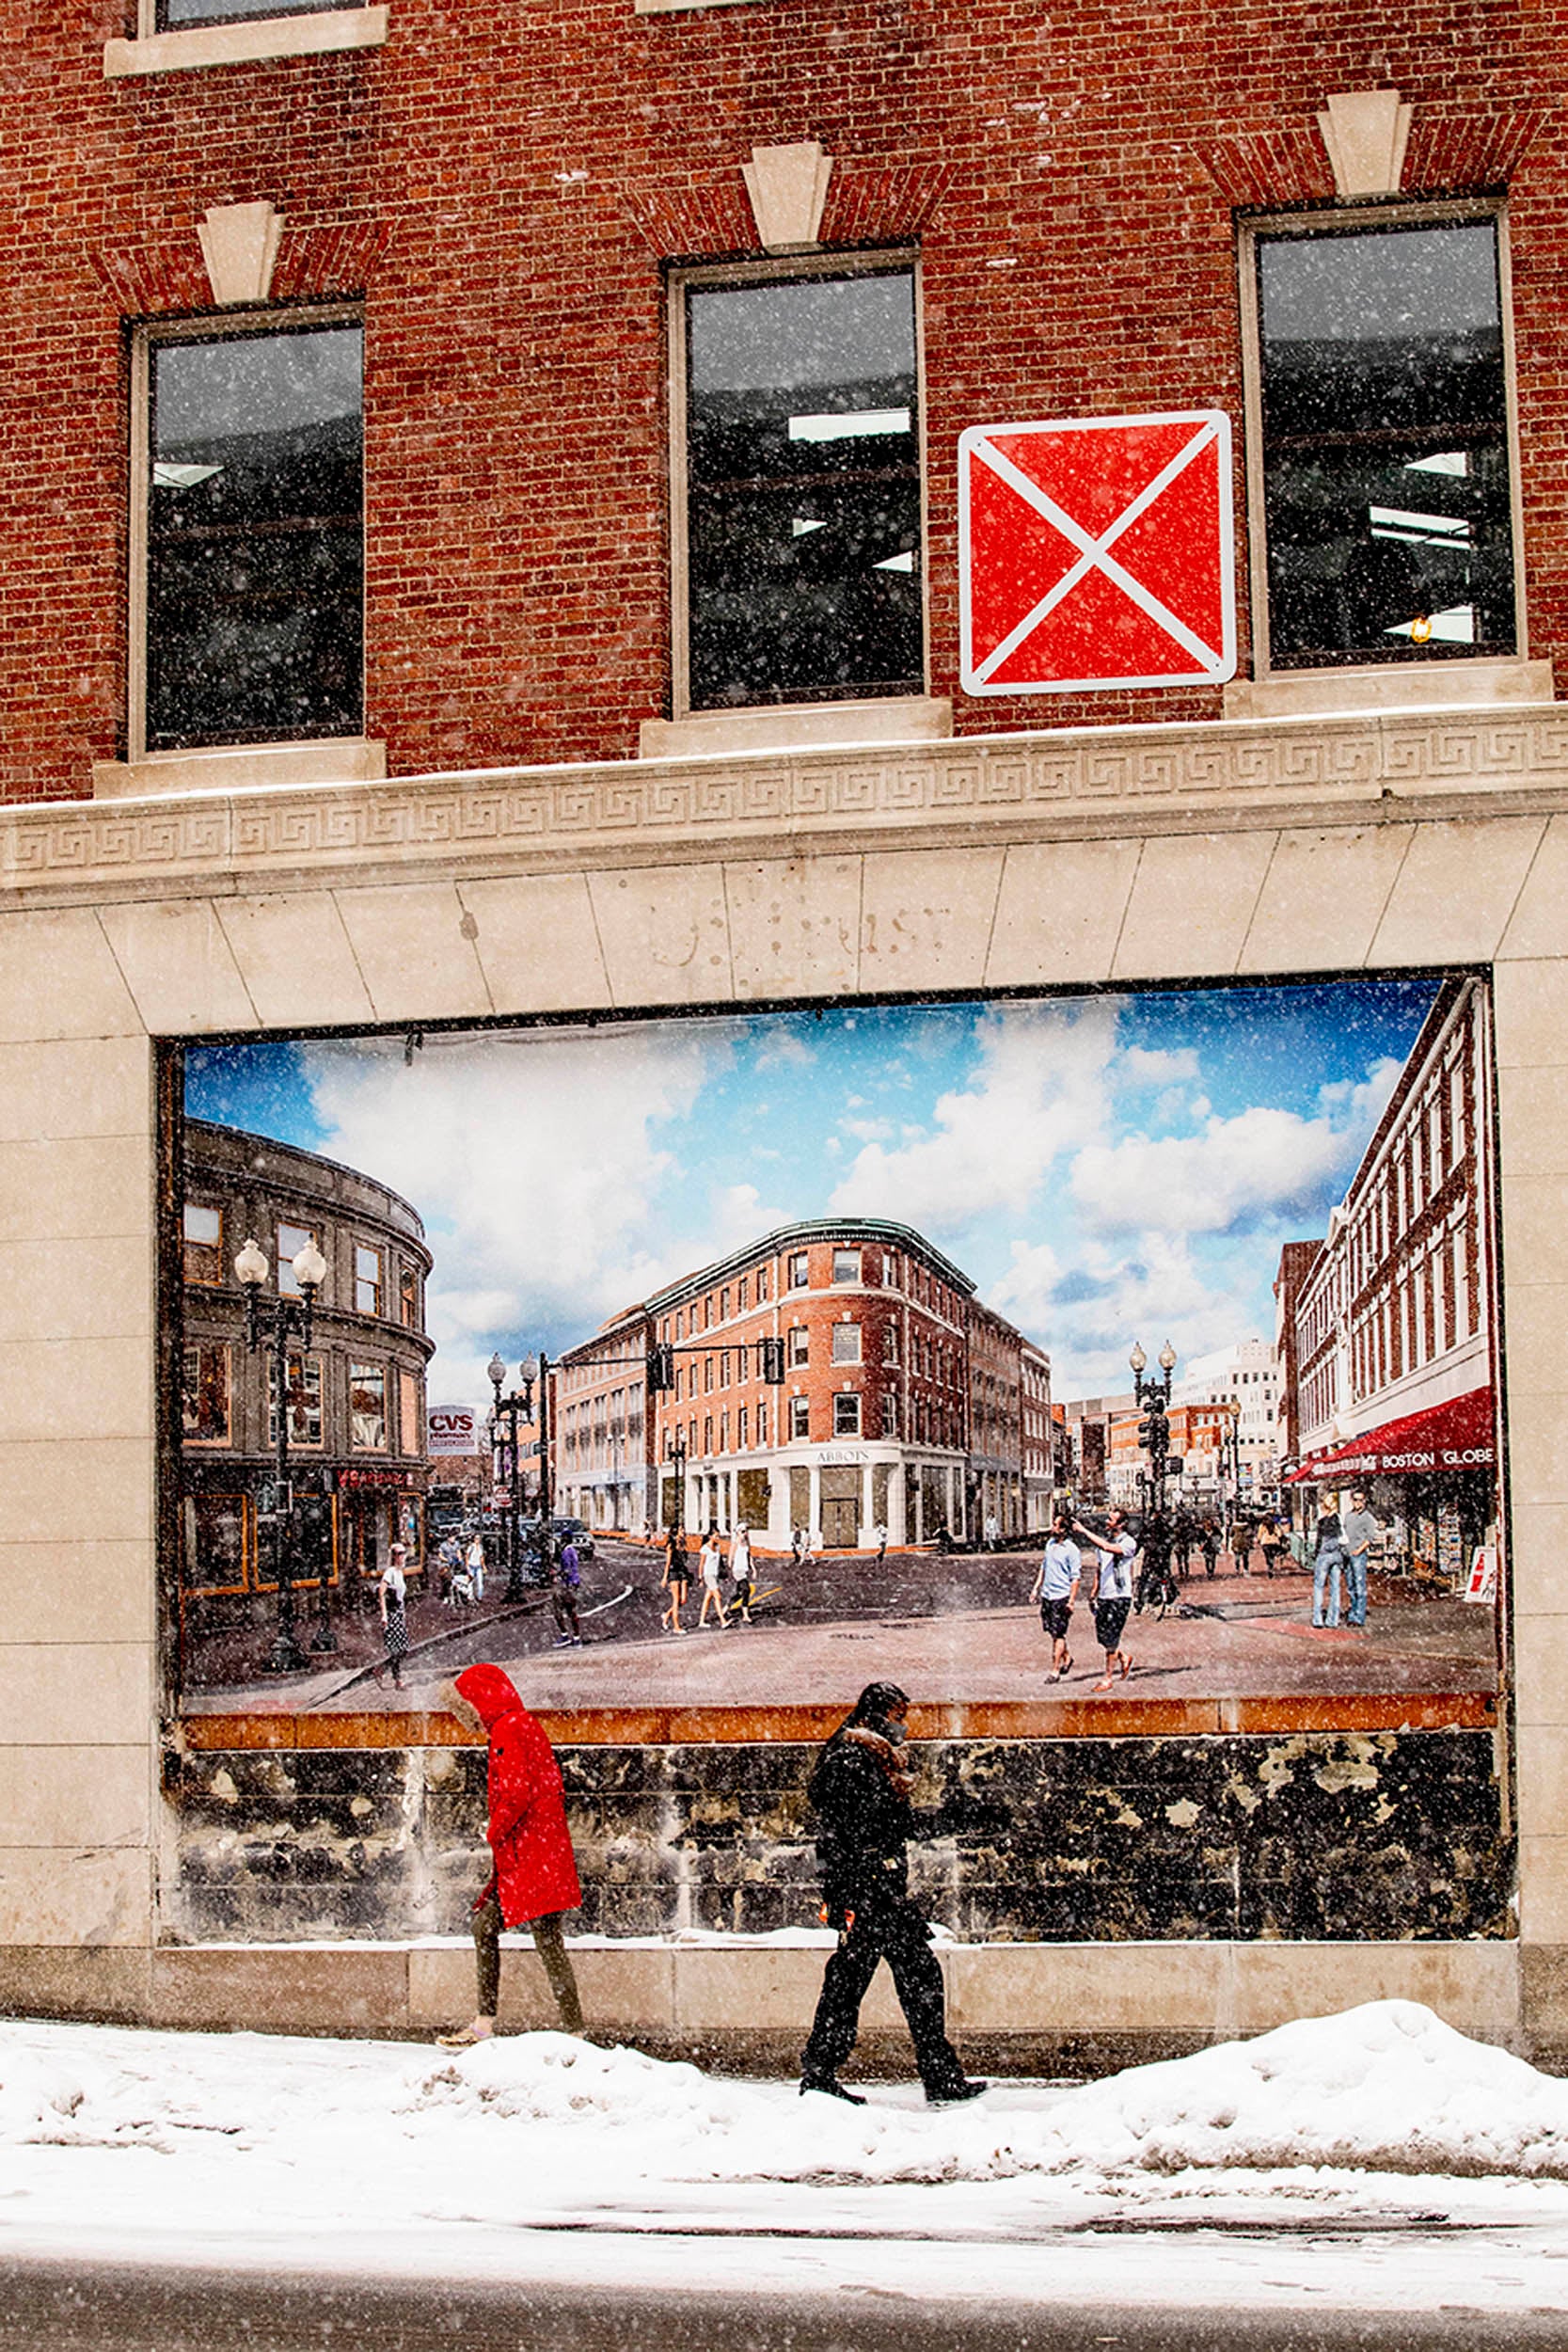 Bundled up pedestrians walk past an artist's rendering of the Abbot building in Harvard Square.